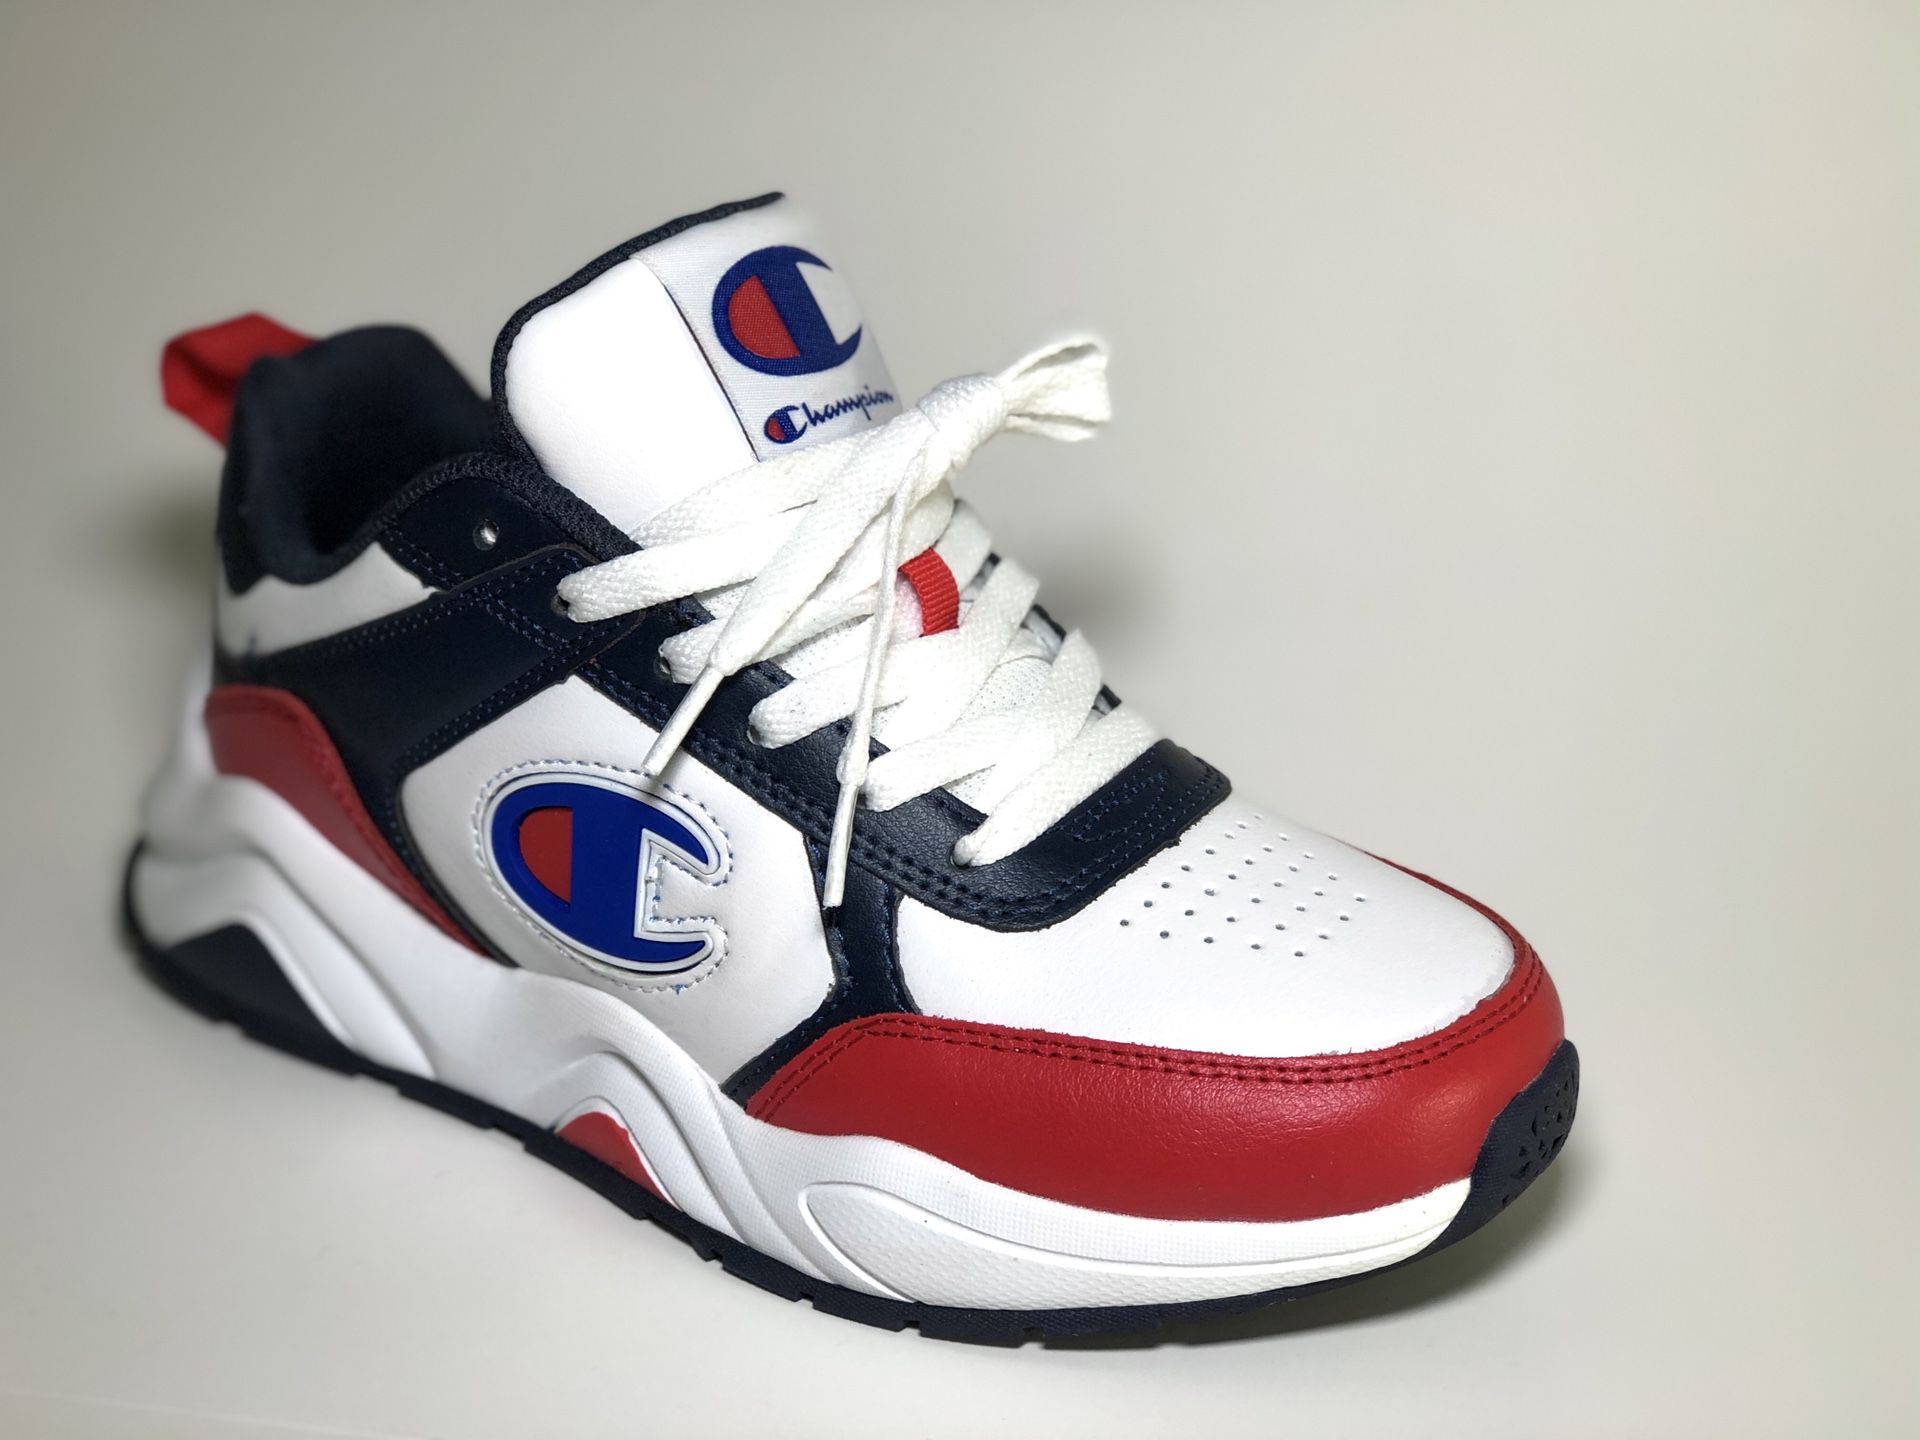 Champion 93eighteen - Youth size 4.5